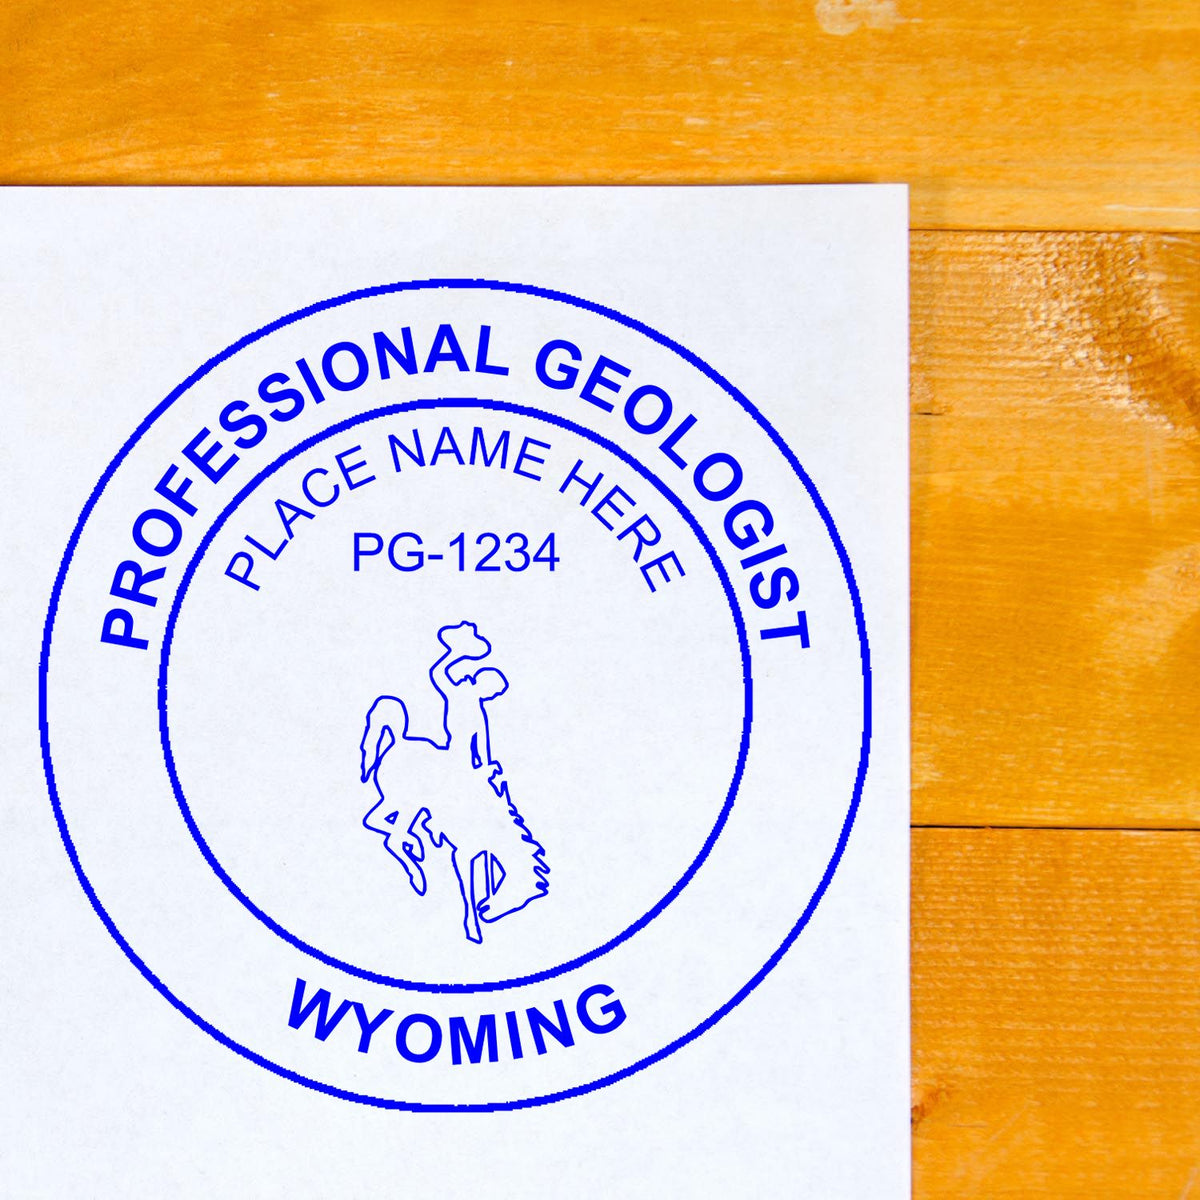 The Slim Pre-Inked Wyoming Professional Geologist Seal Stamp stamp impression comes to life with a crisp, detailed image stamped on paper - showcasing true professional quality.